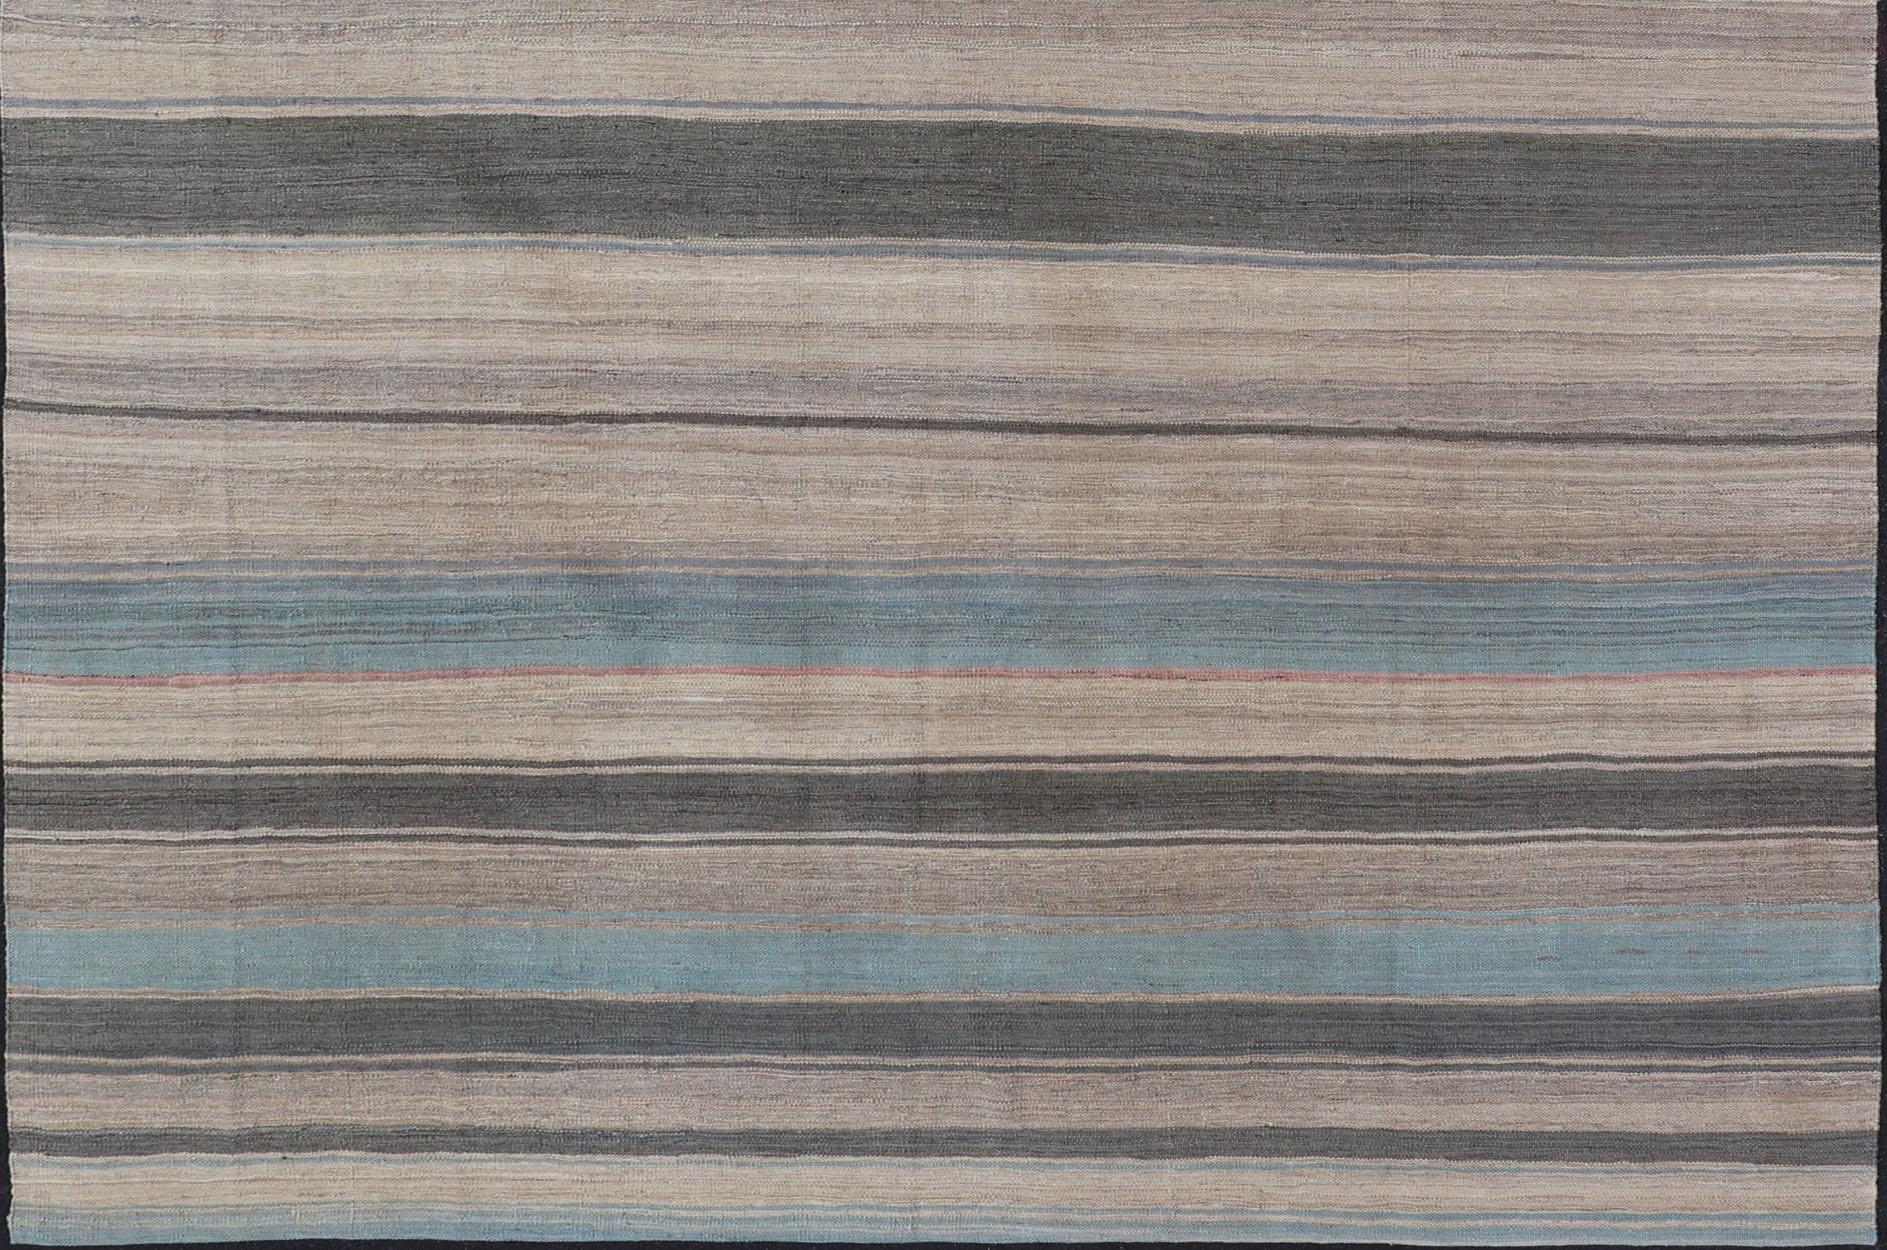 Hand-Woven Modern Kilim Rug with Large Stripes in Shades of Blue, Taupe, Gray For Sale